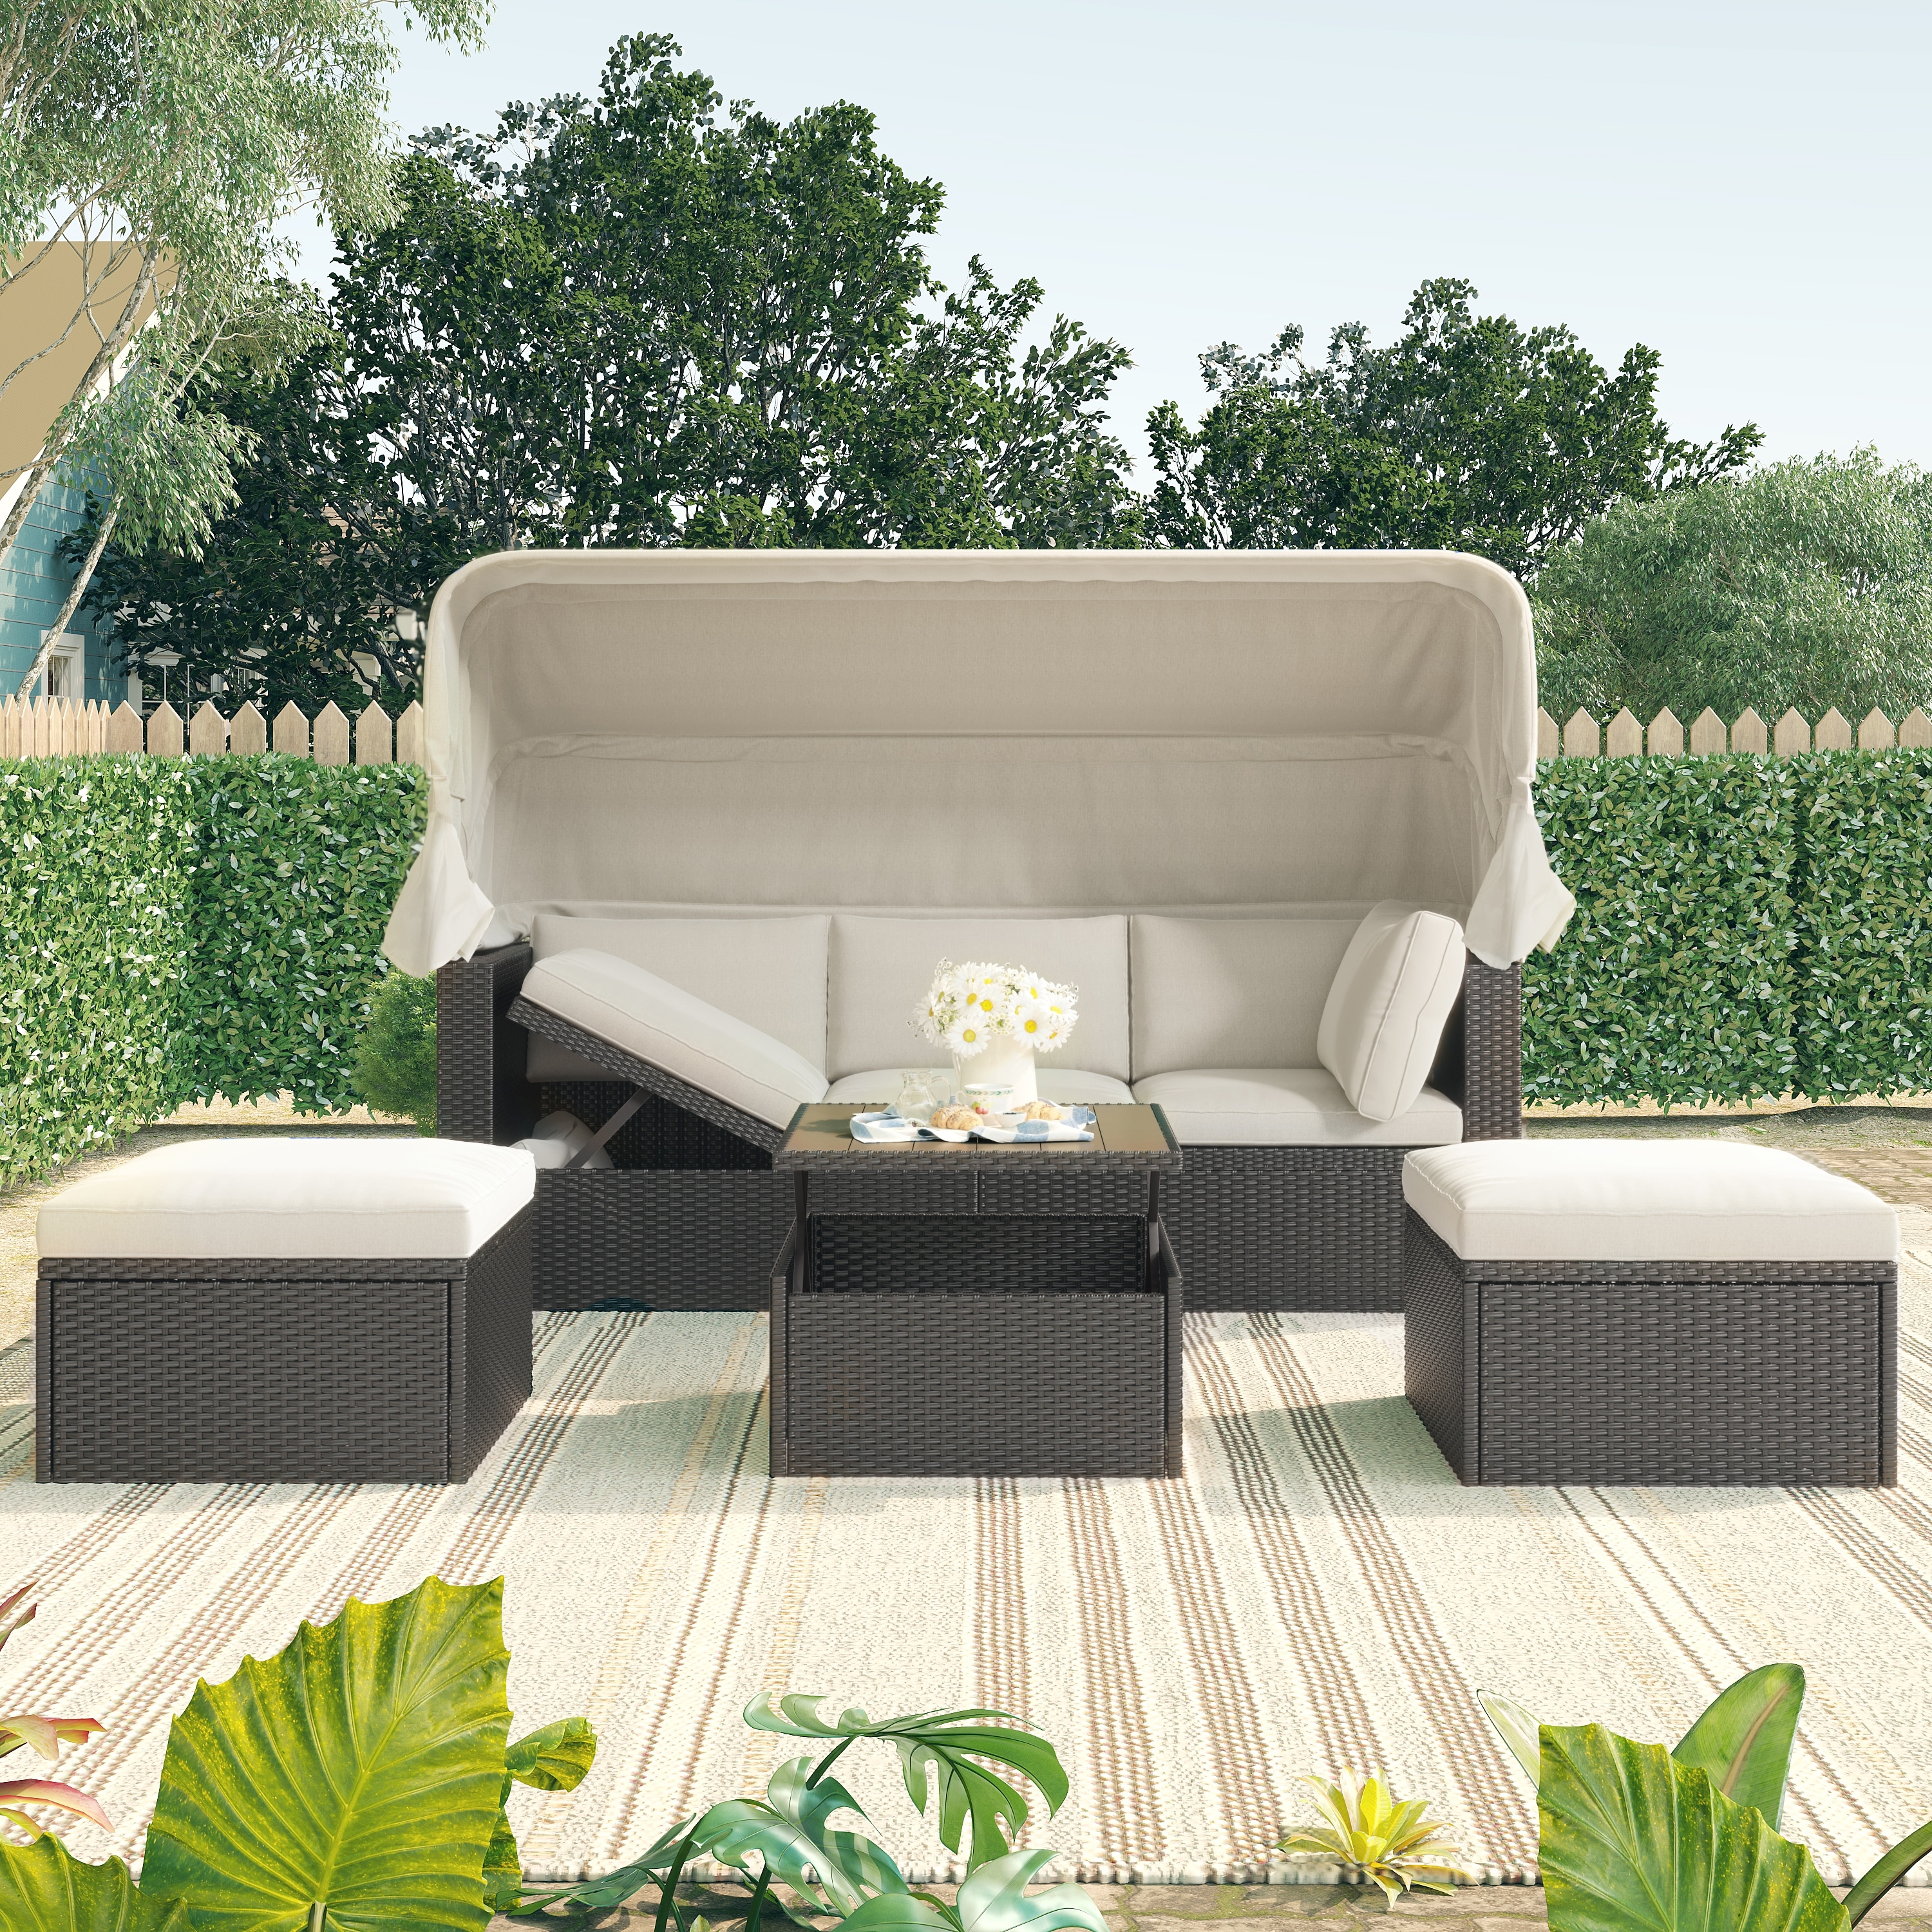 Outdoor Patio Rectangle Daybed With Retractable Canopy  Wicker Furniture Sectional Seating And Washable Cushions  For Backyard